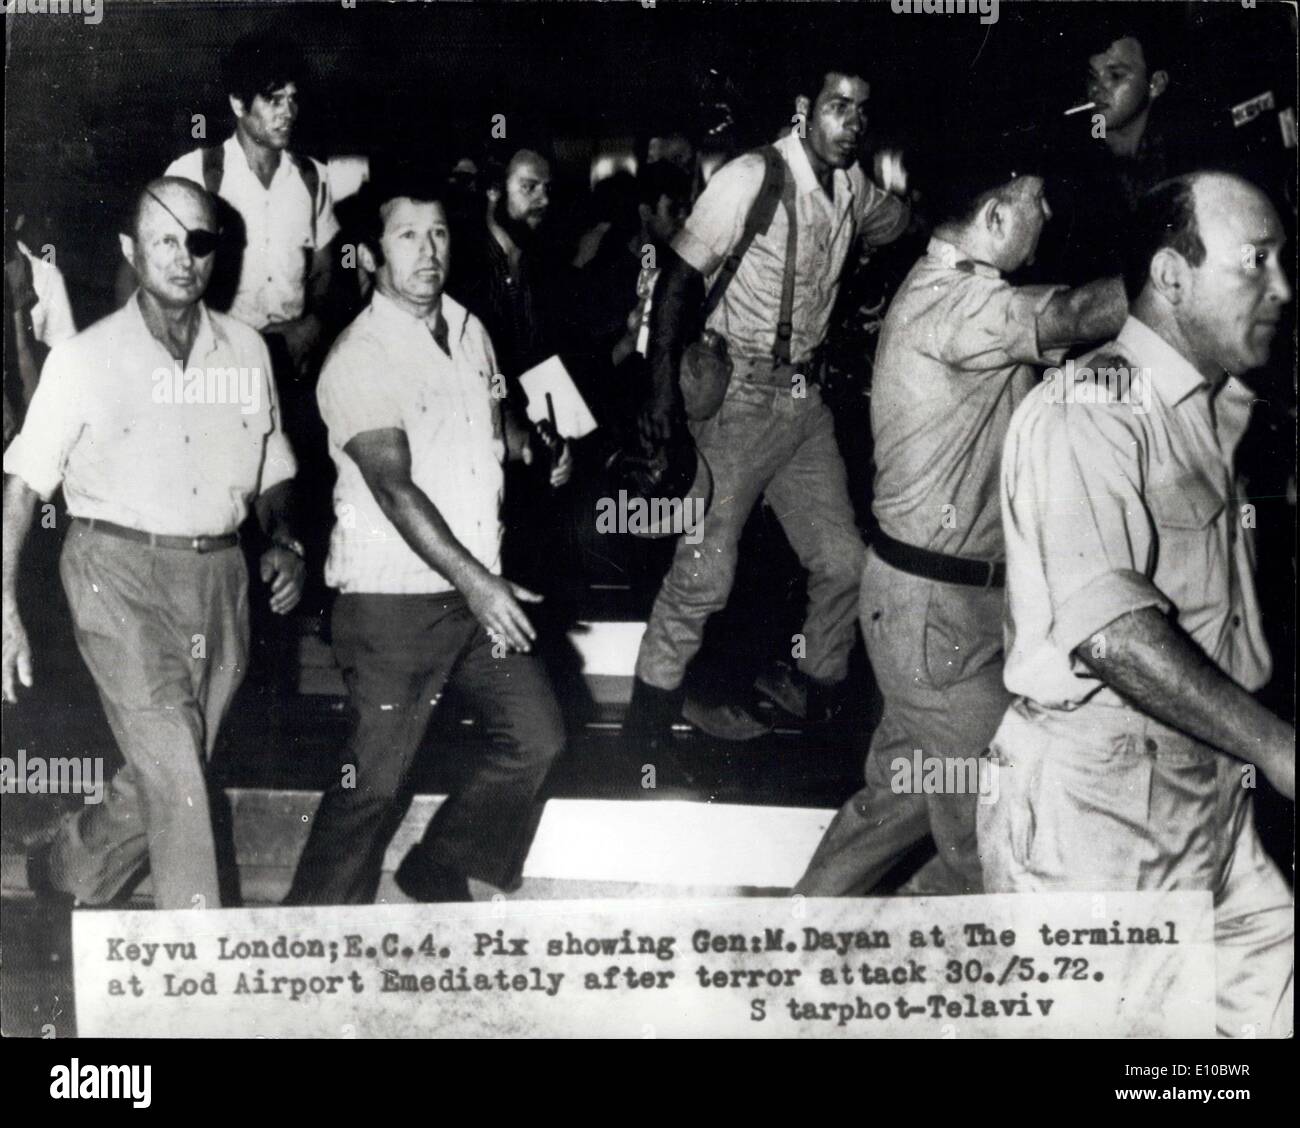 May 31, 1972 - 26 killed in Terrorist attack at Tel Aviv airport.: 26 people were killed and many injured when three Japanese terrorists fired automatic rifles and threw hand grenades into the terminal at Lod Airport. Tel Aviv last night. Photo shows the Israel Defense Minister, Moshe Dayan (left), at the terminal at Lod Airport immediately after the terrorist attack. Stock Photo